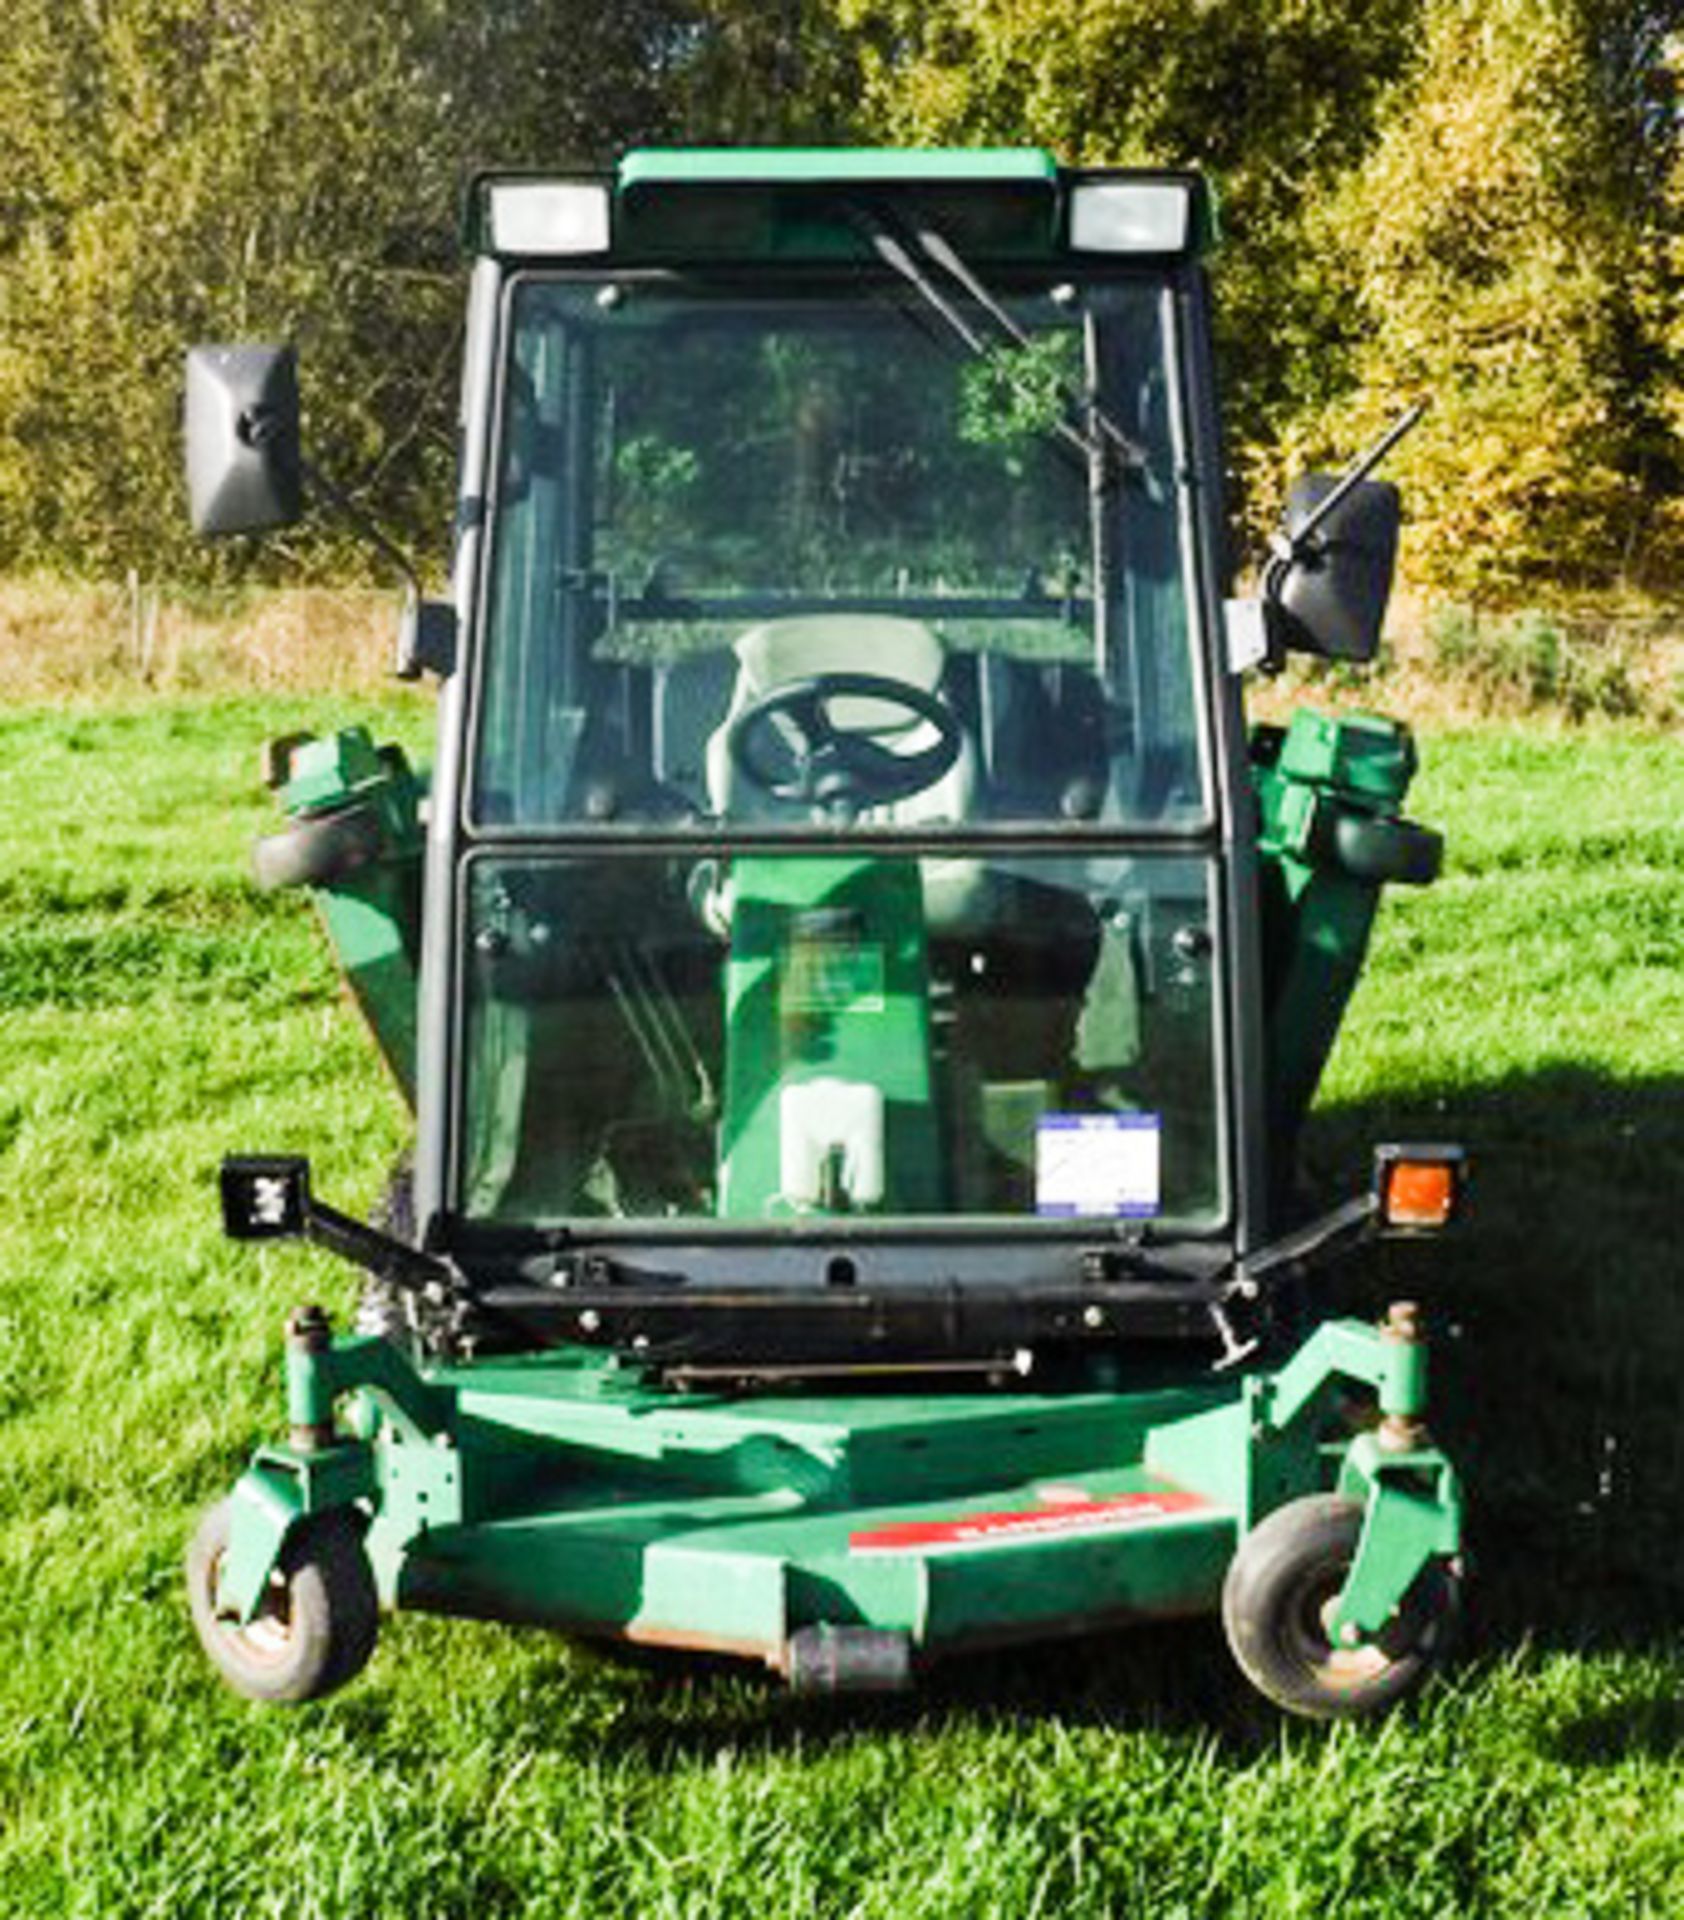 2006 RANSOME HF6010 BATWING ROTARY MOWER, CUTS APPROX 10FT 6INCHS, PERKINS 6 CYLINDER ENGINE, REG KX - Image 7 of 14